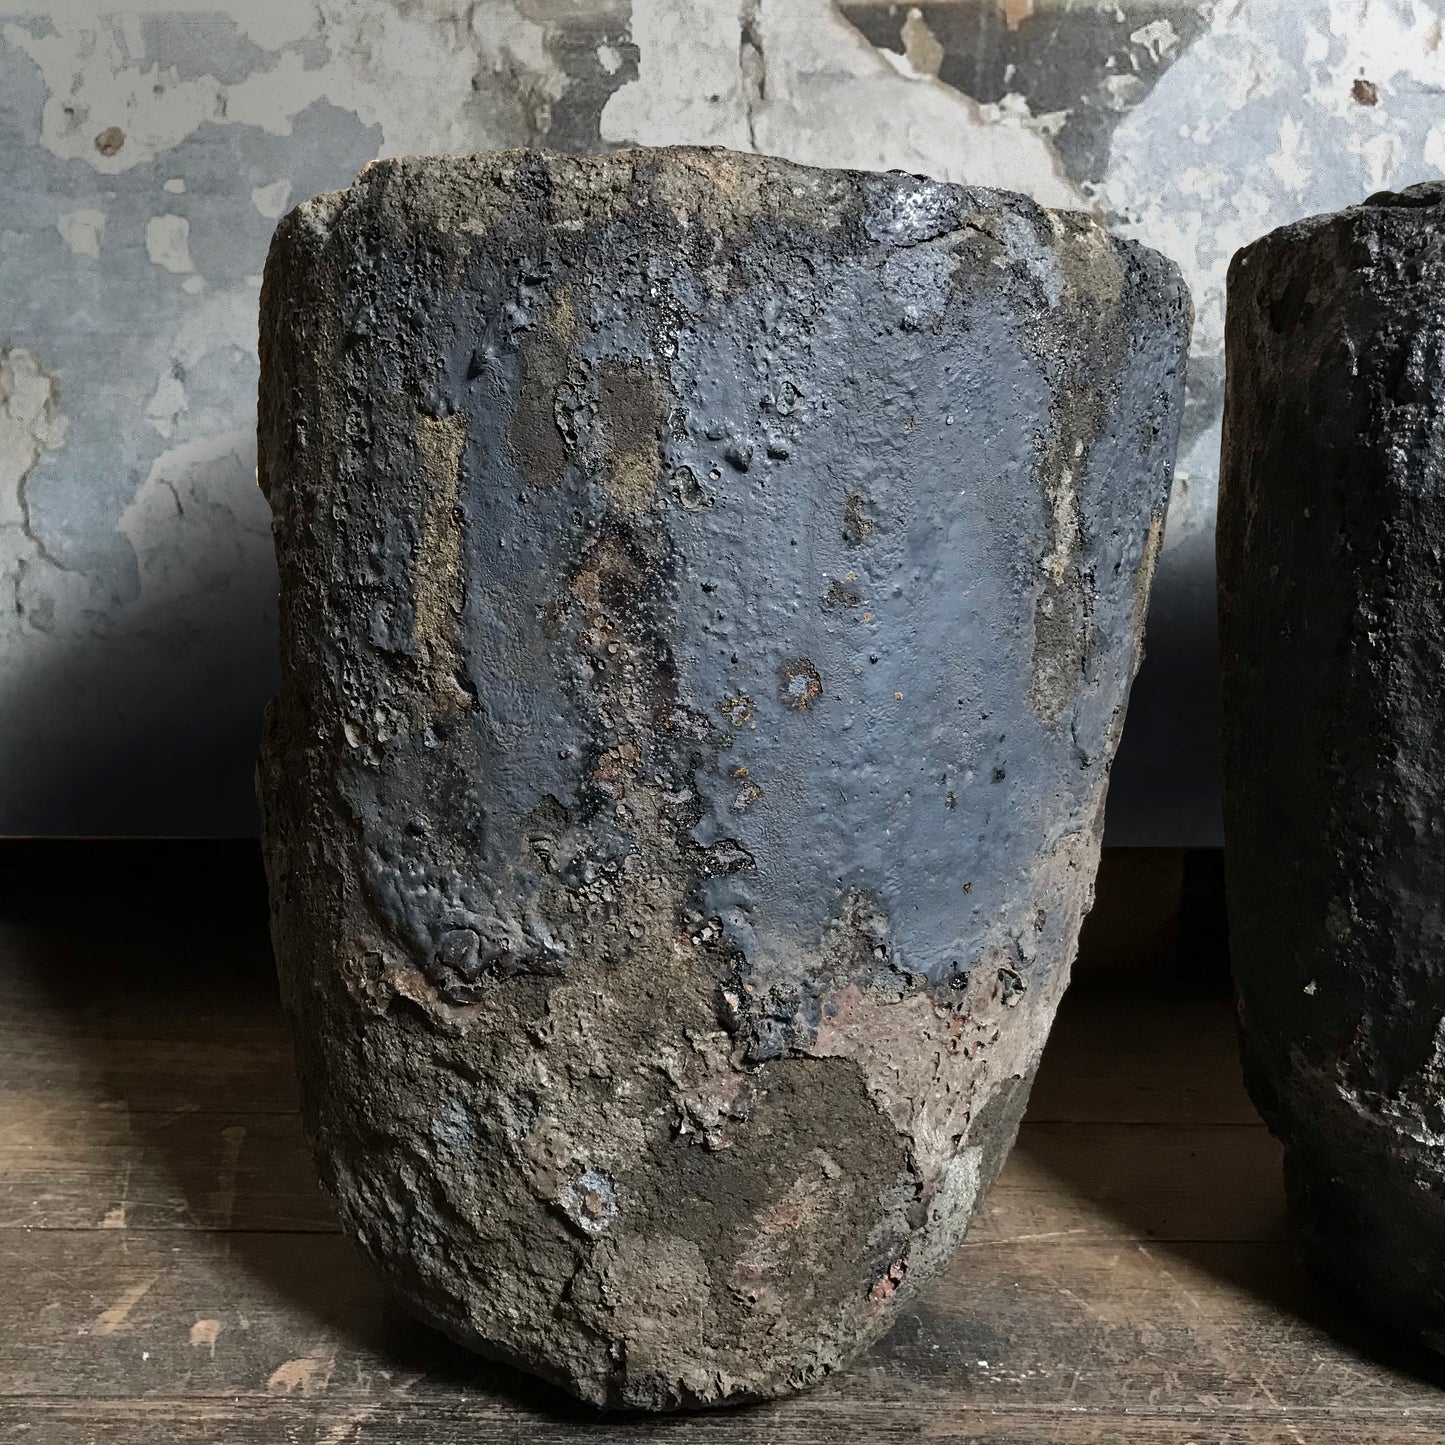 A Pair of Copper Foundry Crucibles